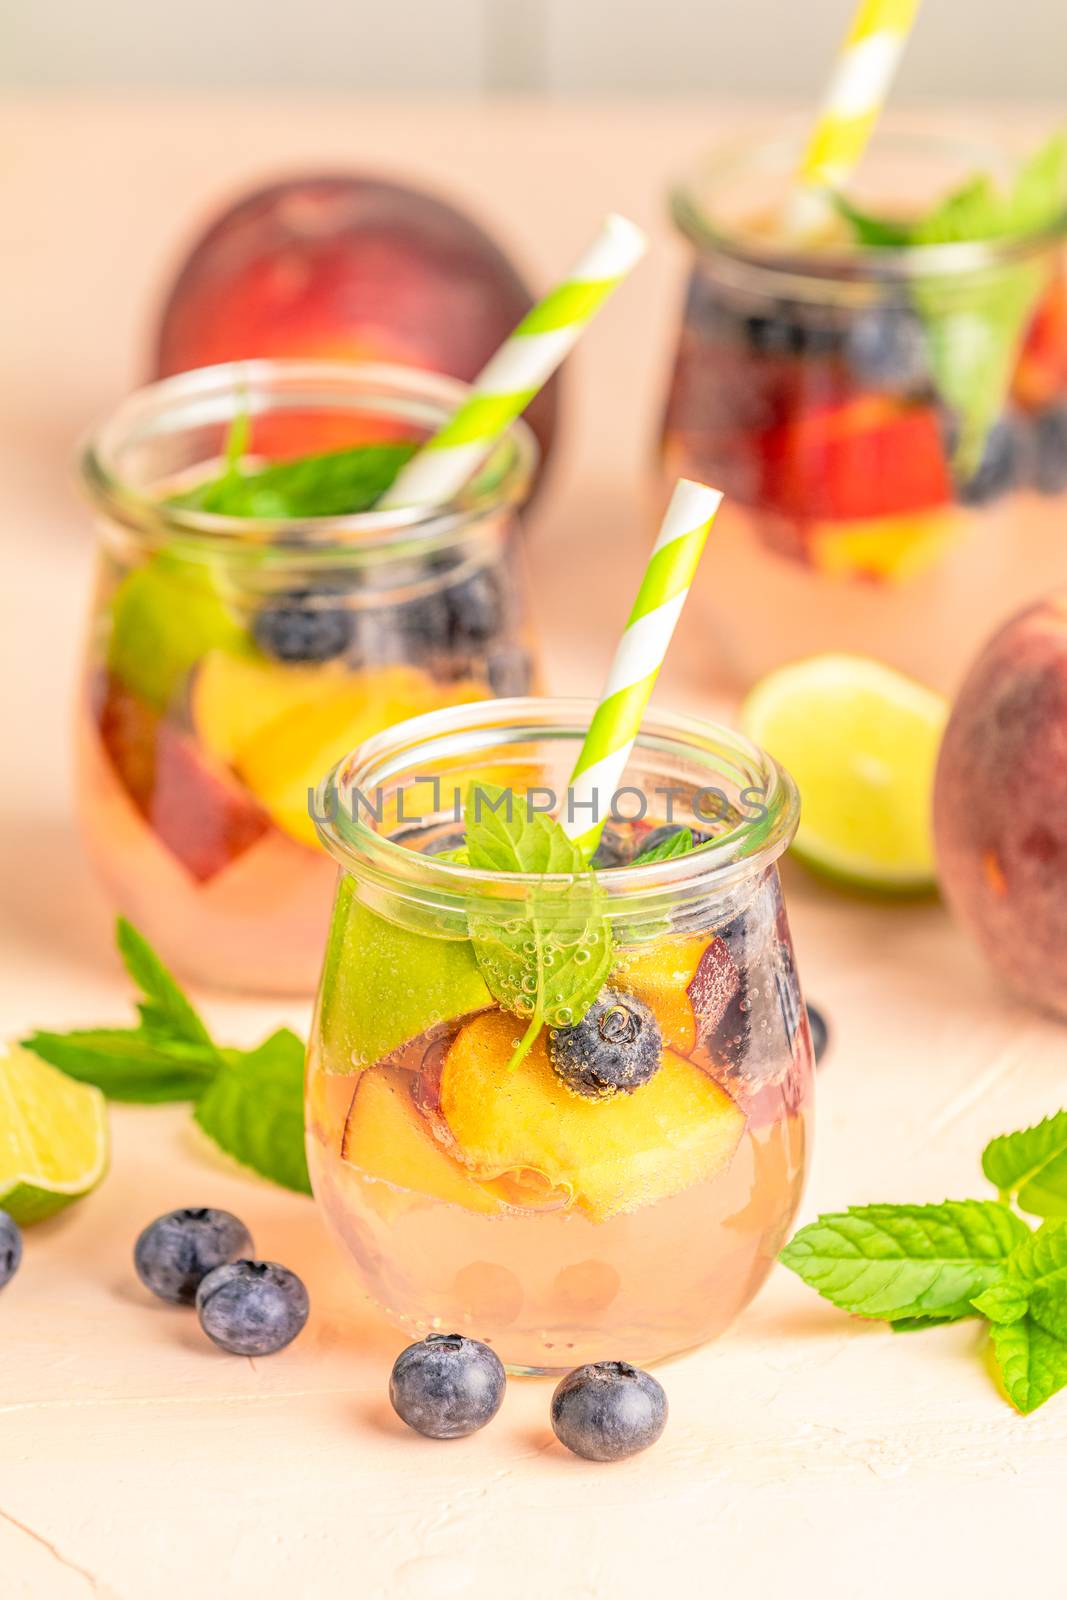 Blueberry and peach infused water, cocktail, lemonade or tea. Su by ArtSvitlyna